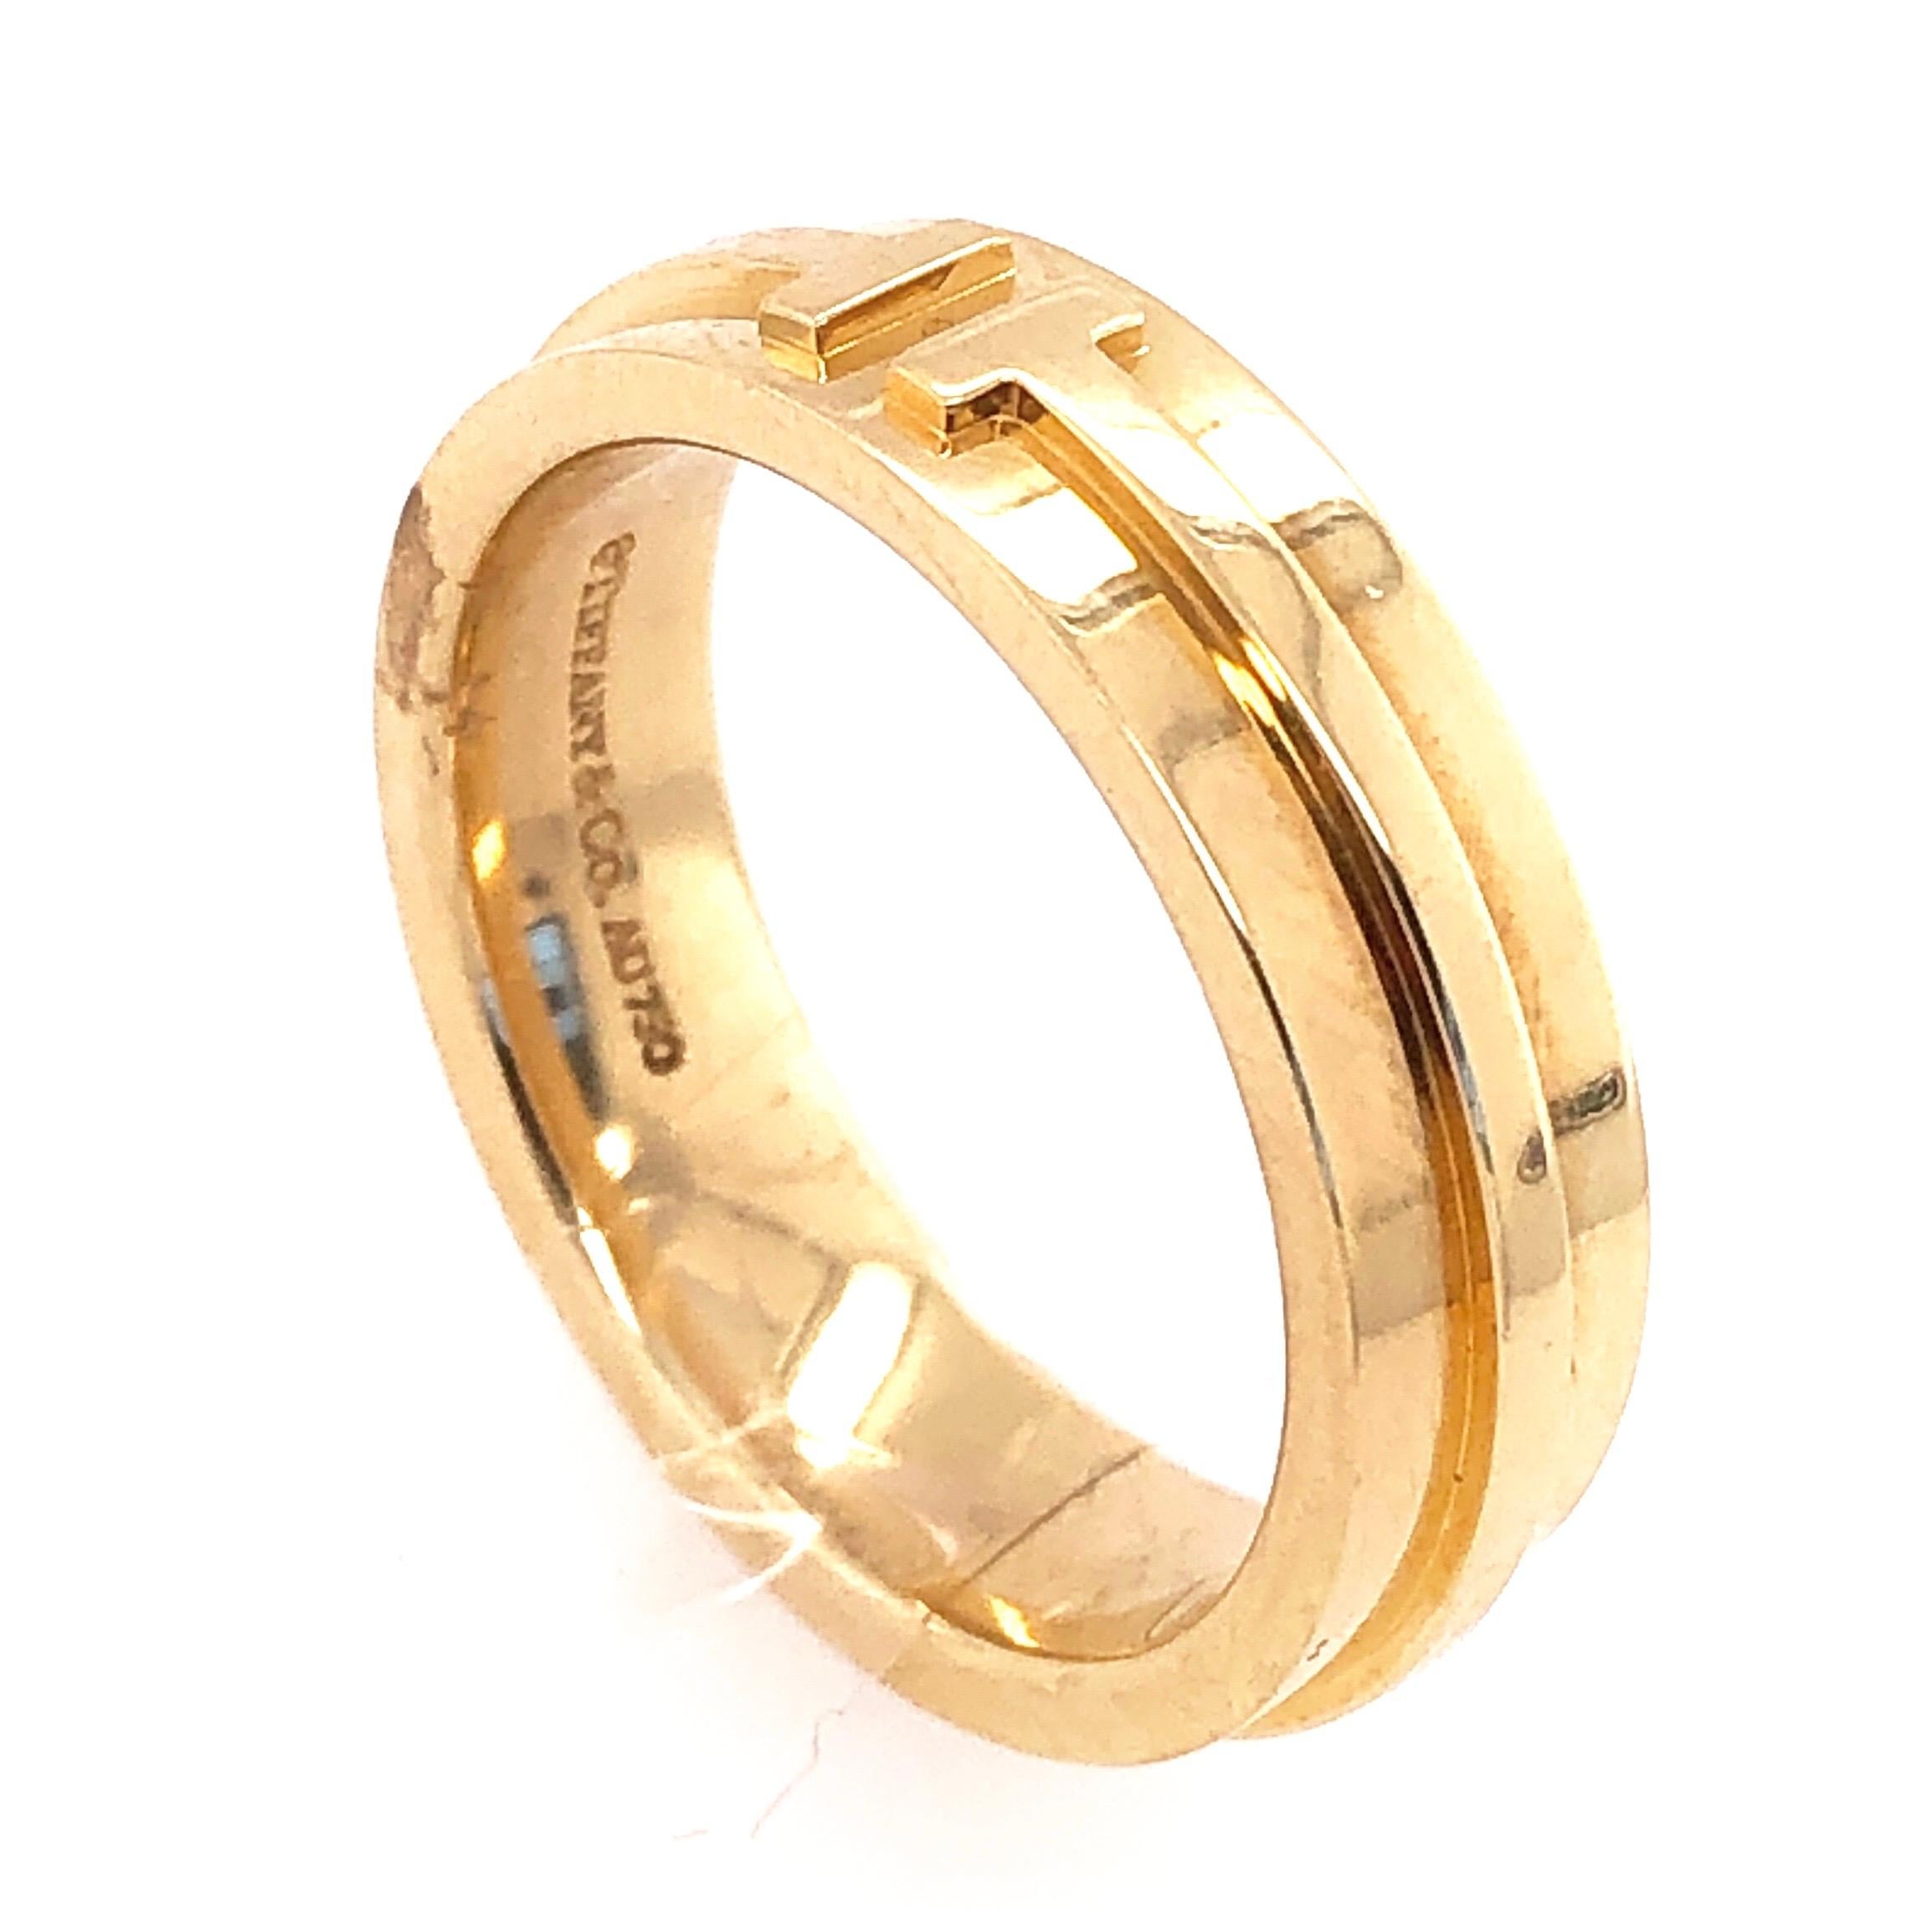 Tiffany & Co. 18Kt Yellow Gold Wedding Ring/ Band. Stamped AU750
Size 8 with 11 grams total weight.